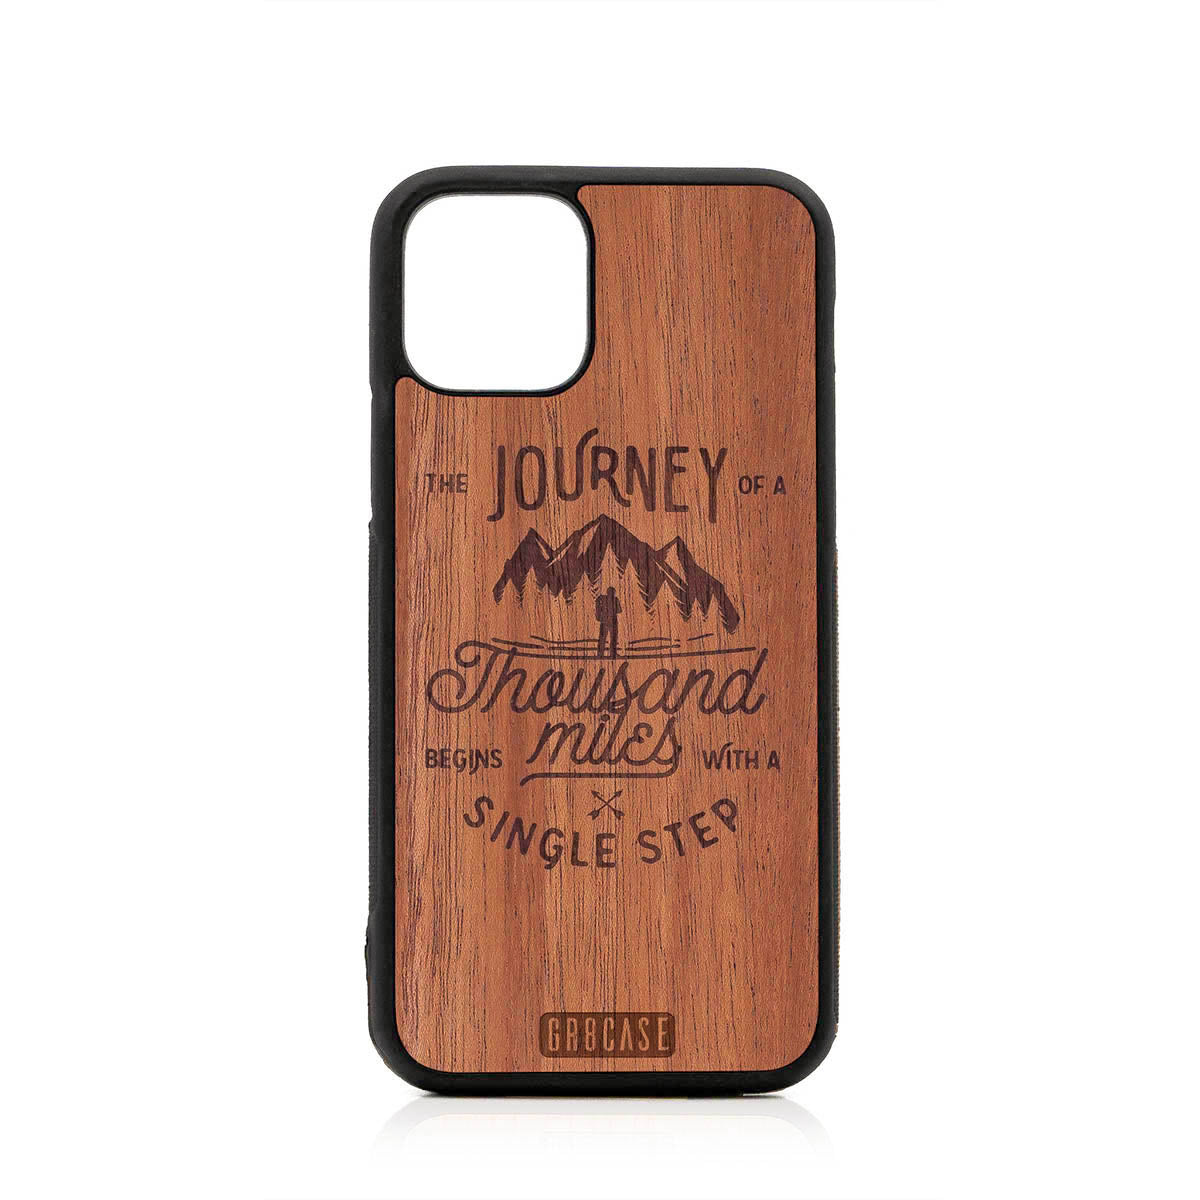 The Journey Of A Thousand Miles Begins With A Single Step Design Wood Case For iPhone 11 Pro